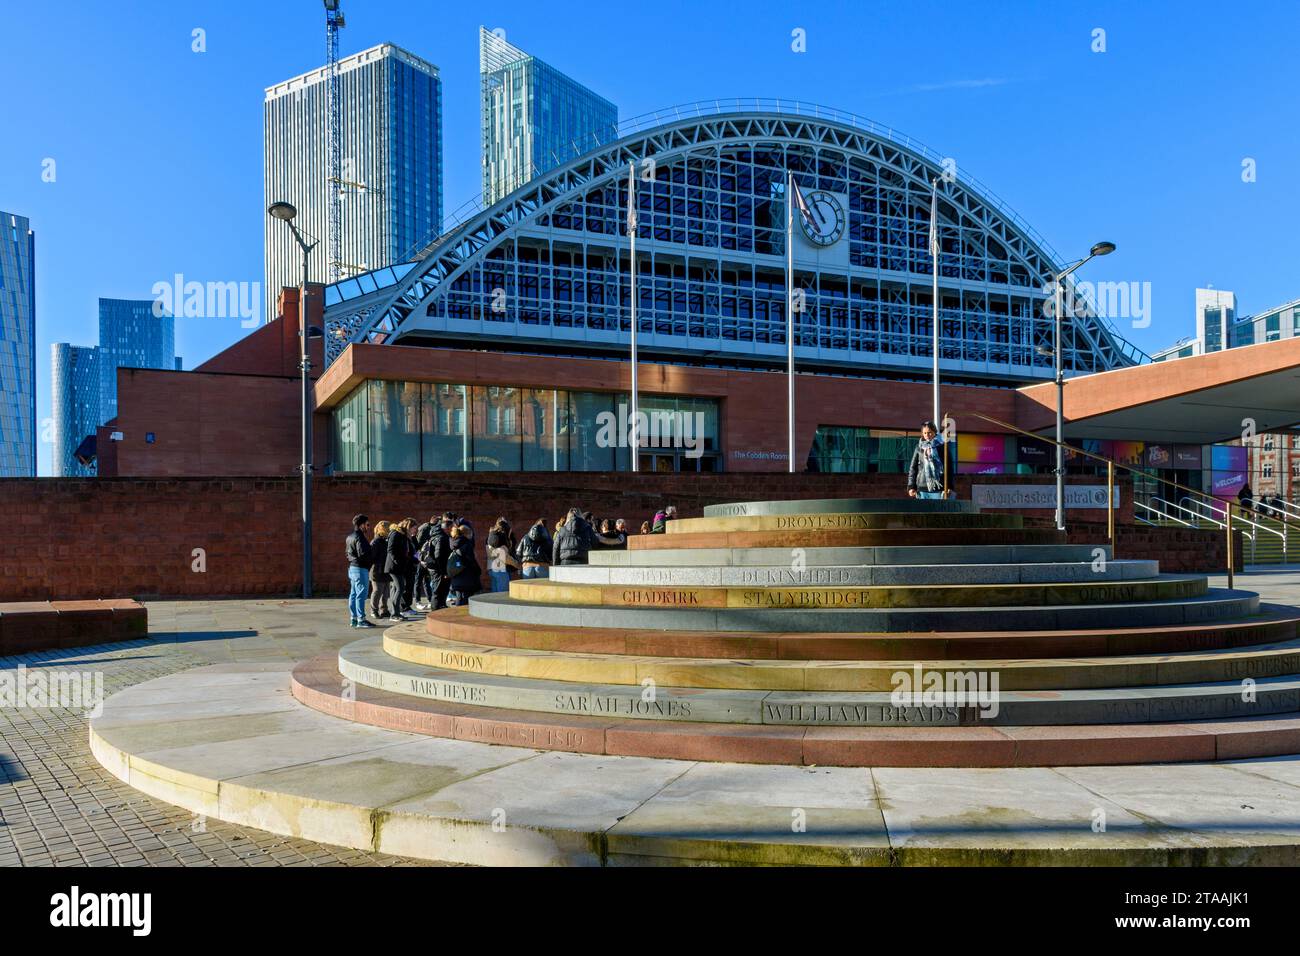 The Peterloo Massacre memorial, designed by Jeremy Deller, outside the Manchester Central building, Manchester UK. The Viadux and Beetham Tower behind Stock Photo